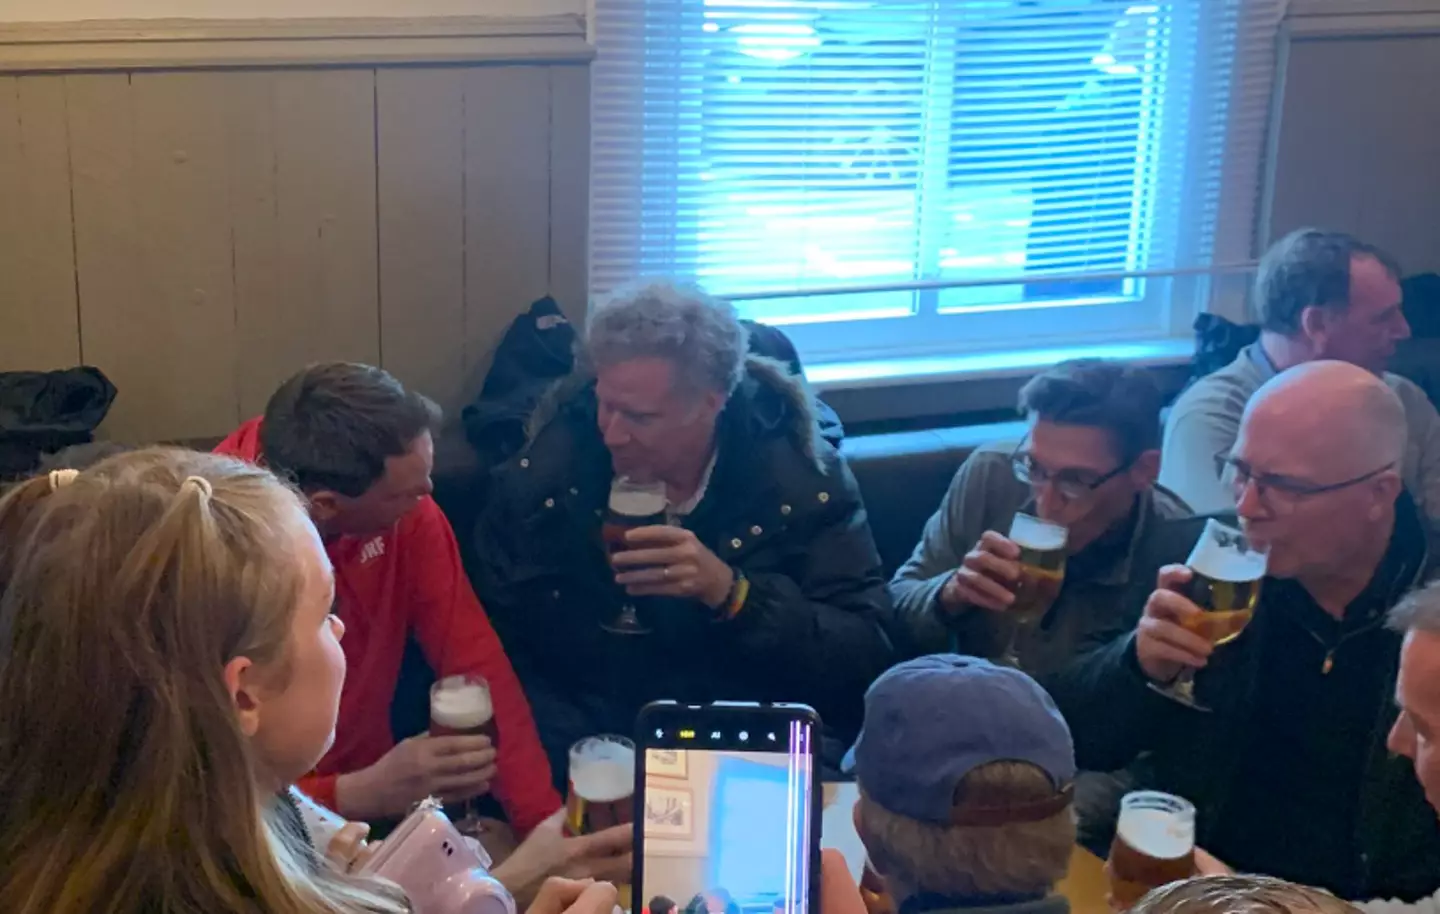 Ferrell was enjoying a pint before the football game.